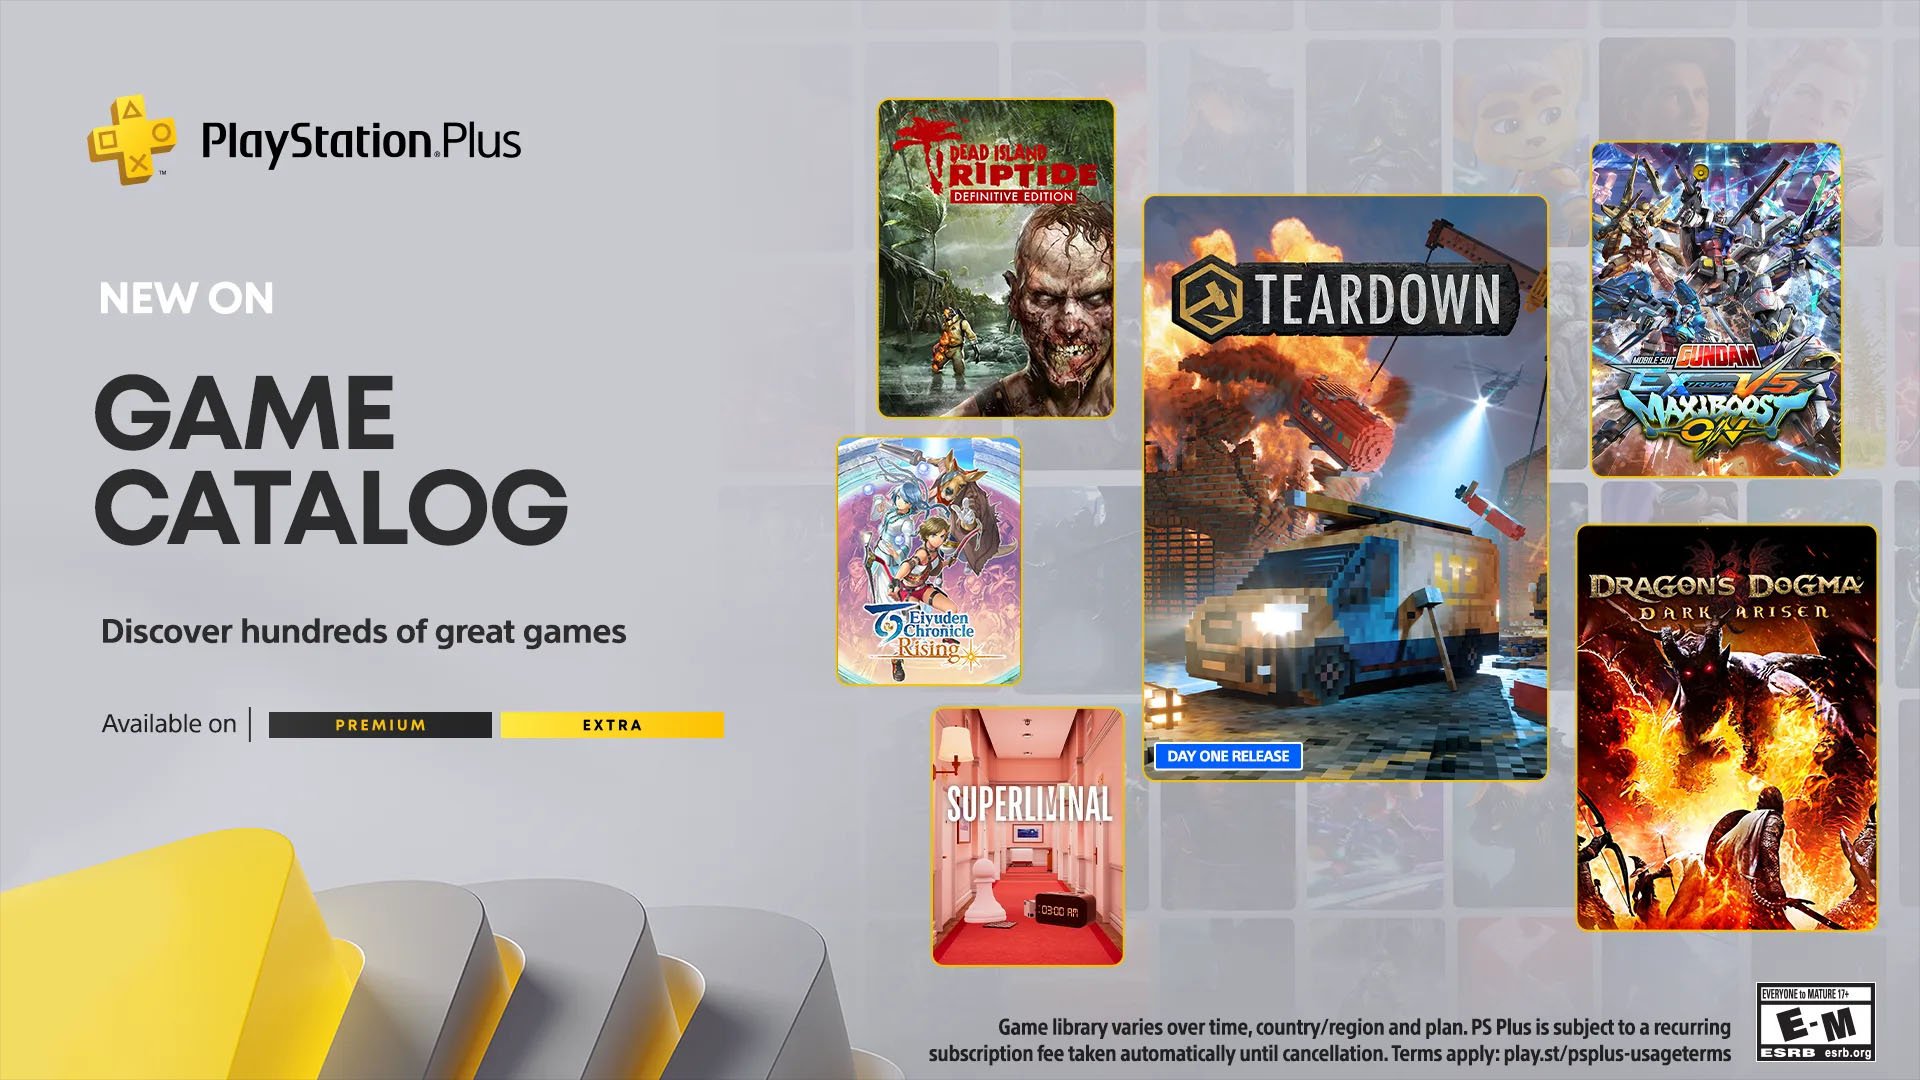 PlayStation Plus Premium Is Finally Worth The Asking Price